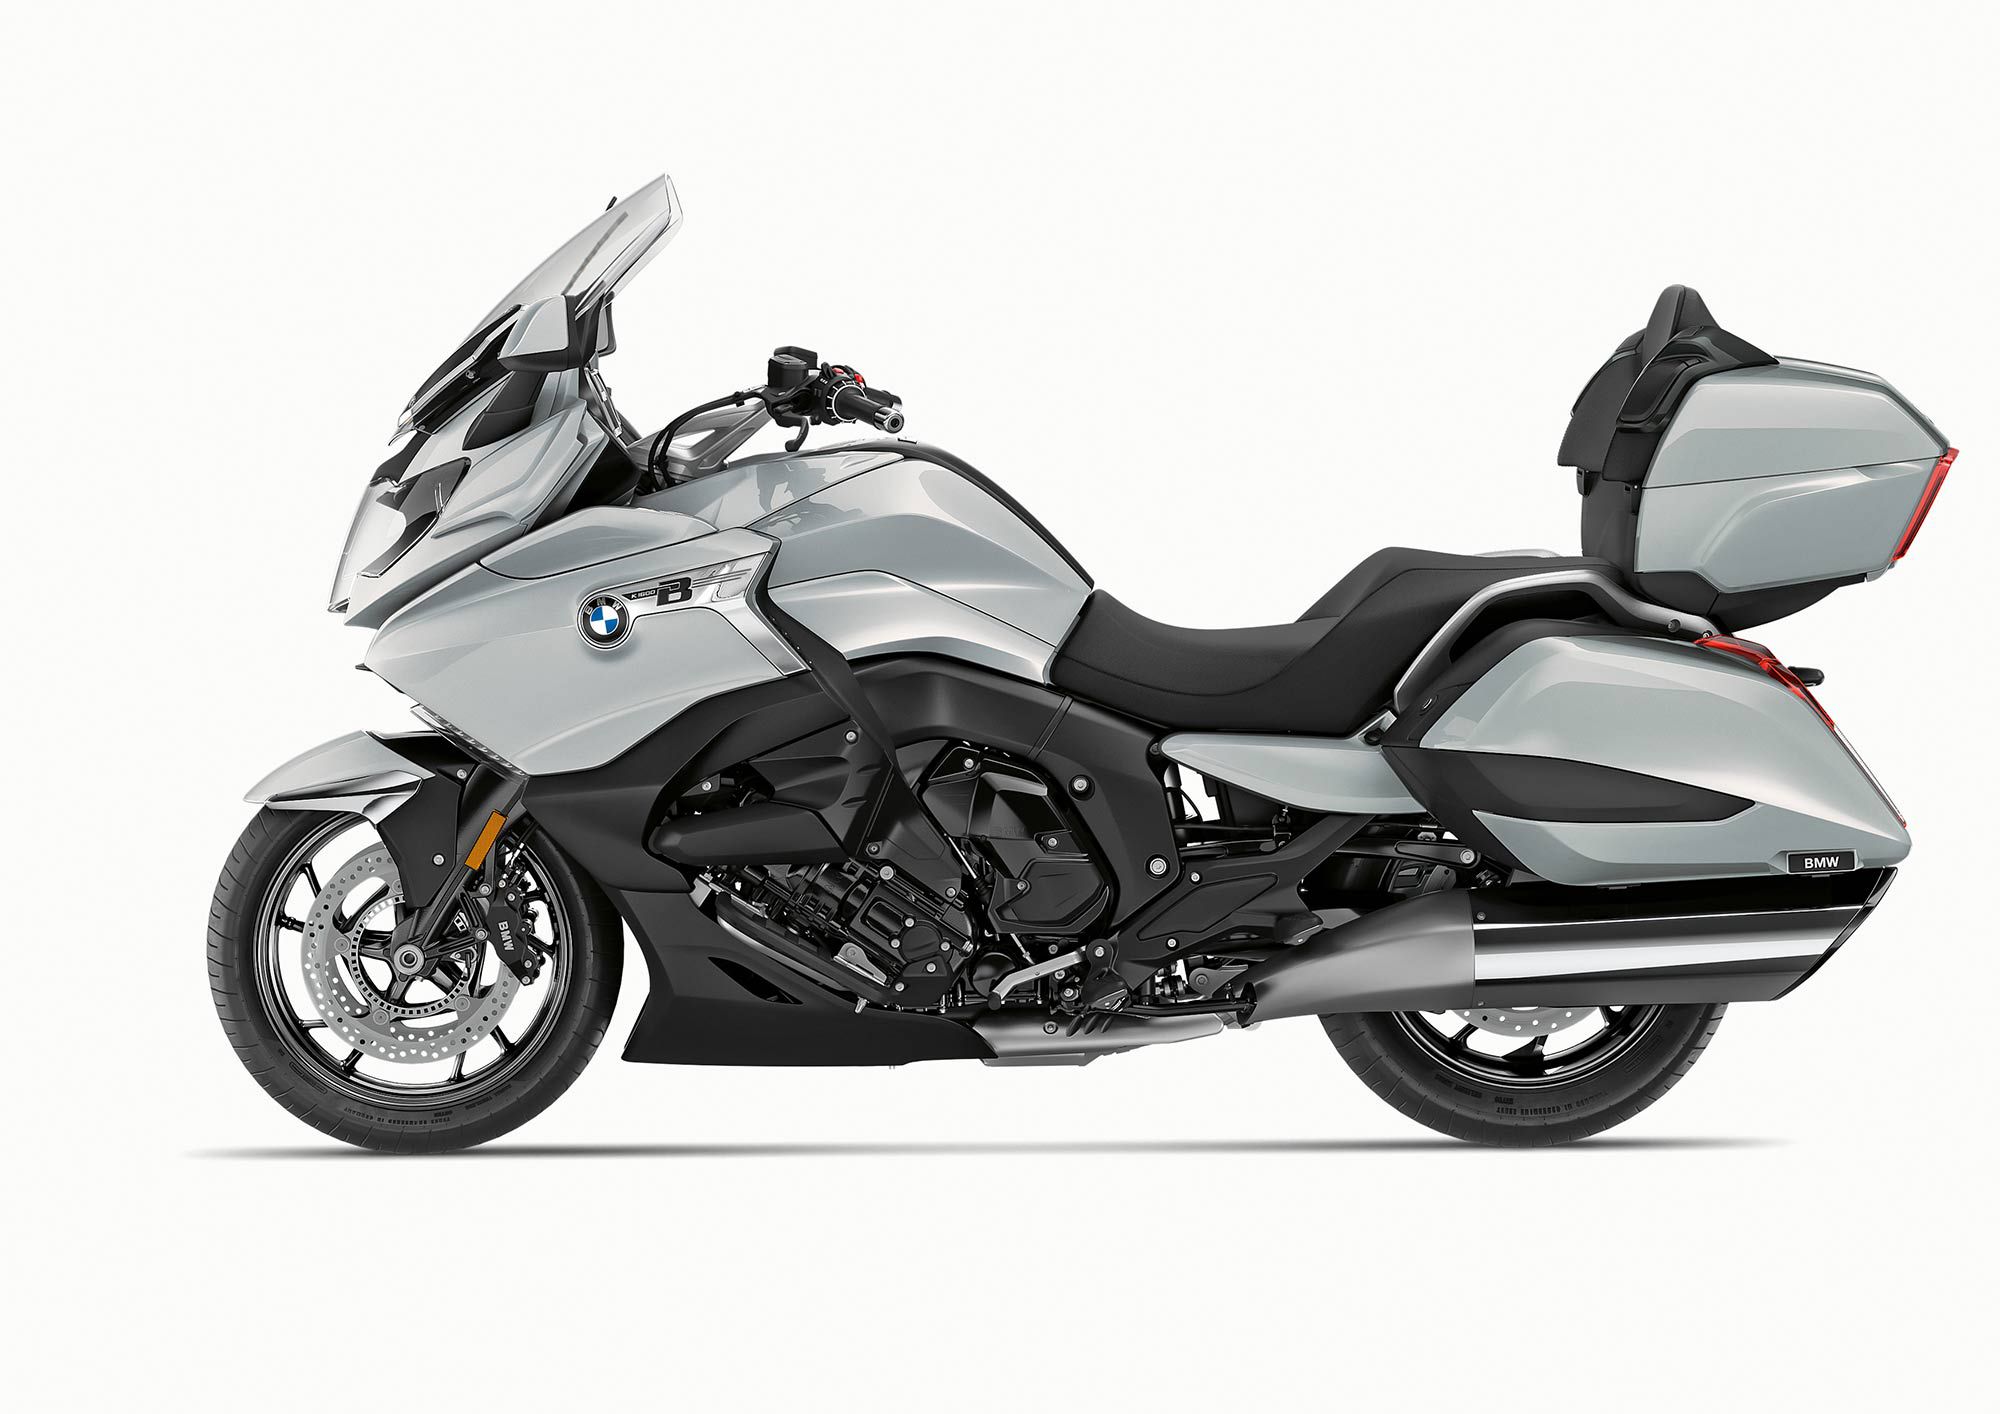 The BMW K 1600 Grand America is a prime example of what luxury two-up riding can be.